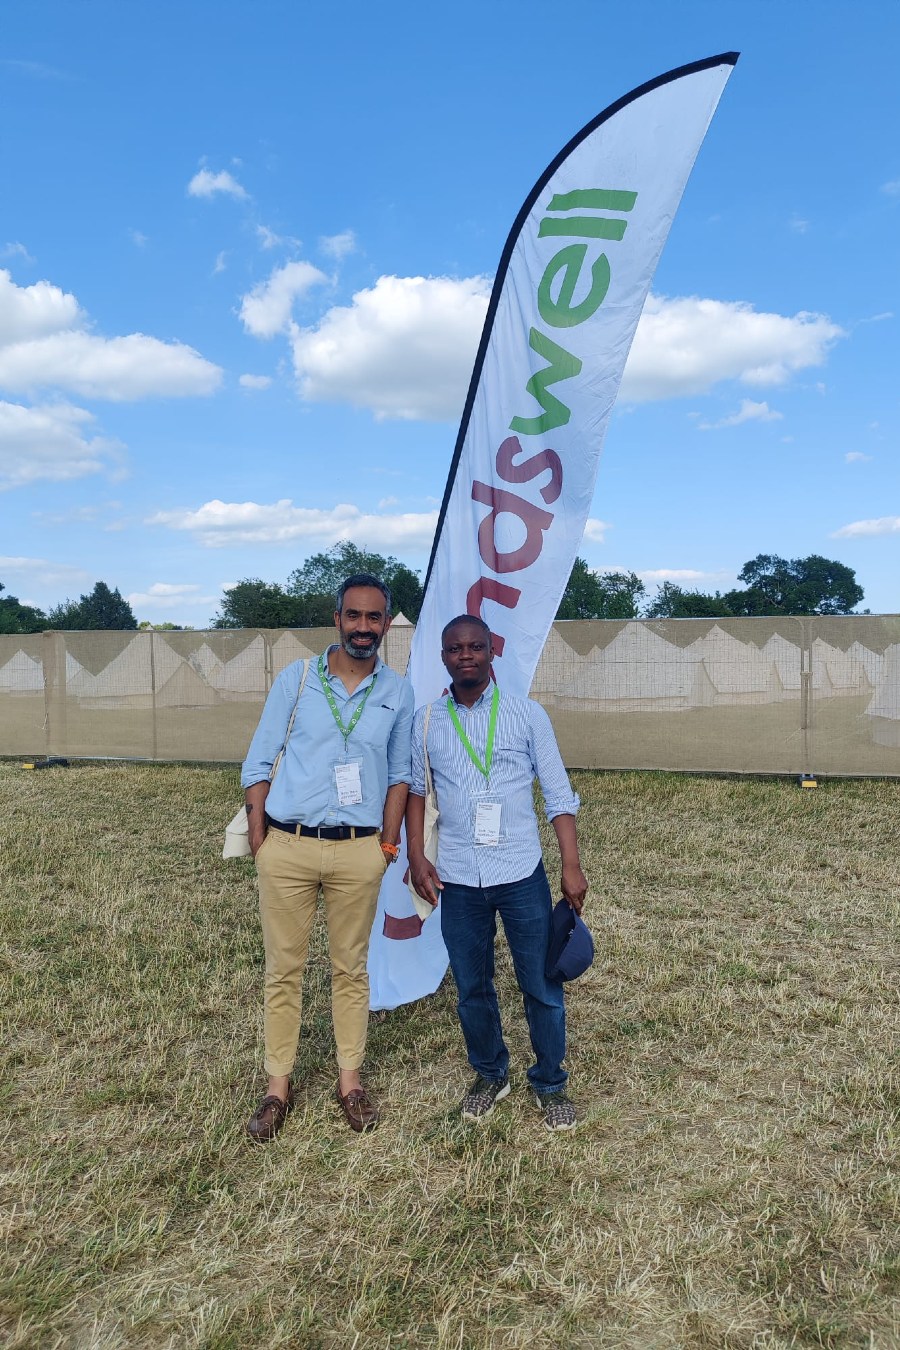 Paul Laniran and colleague outside at the Groundswell farming event